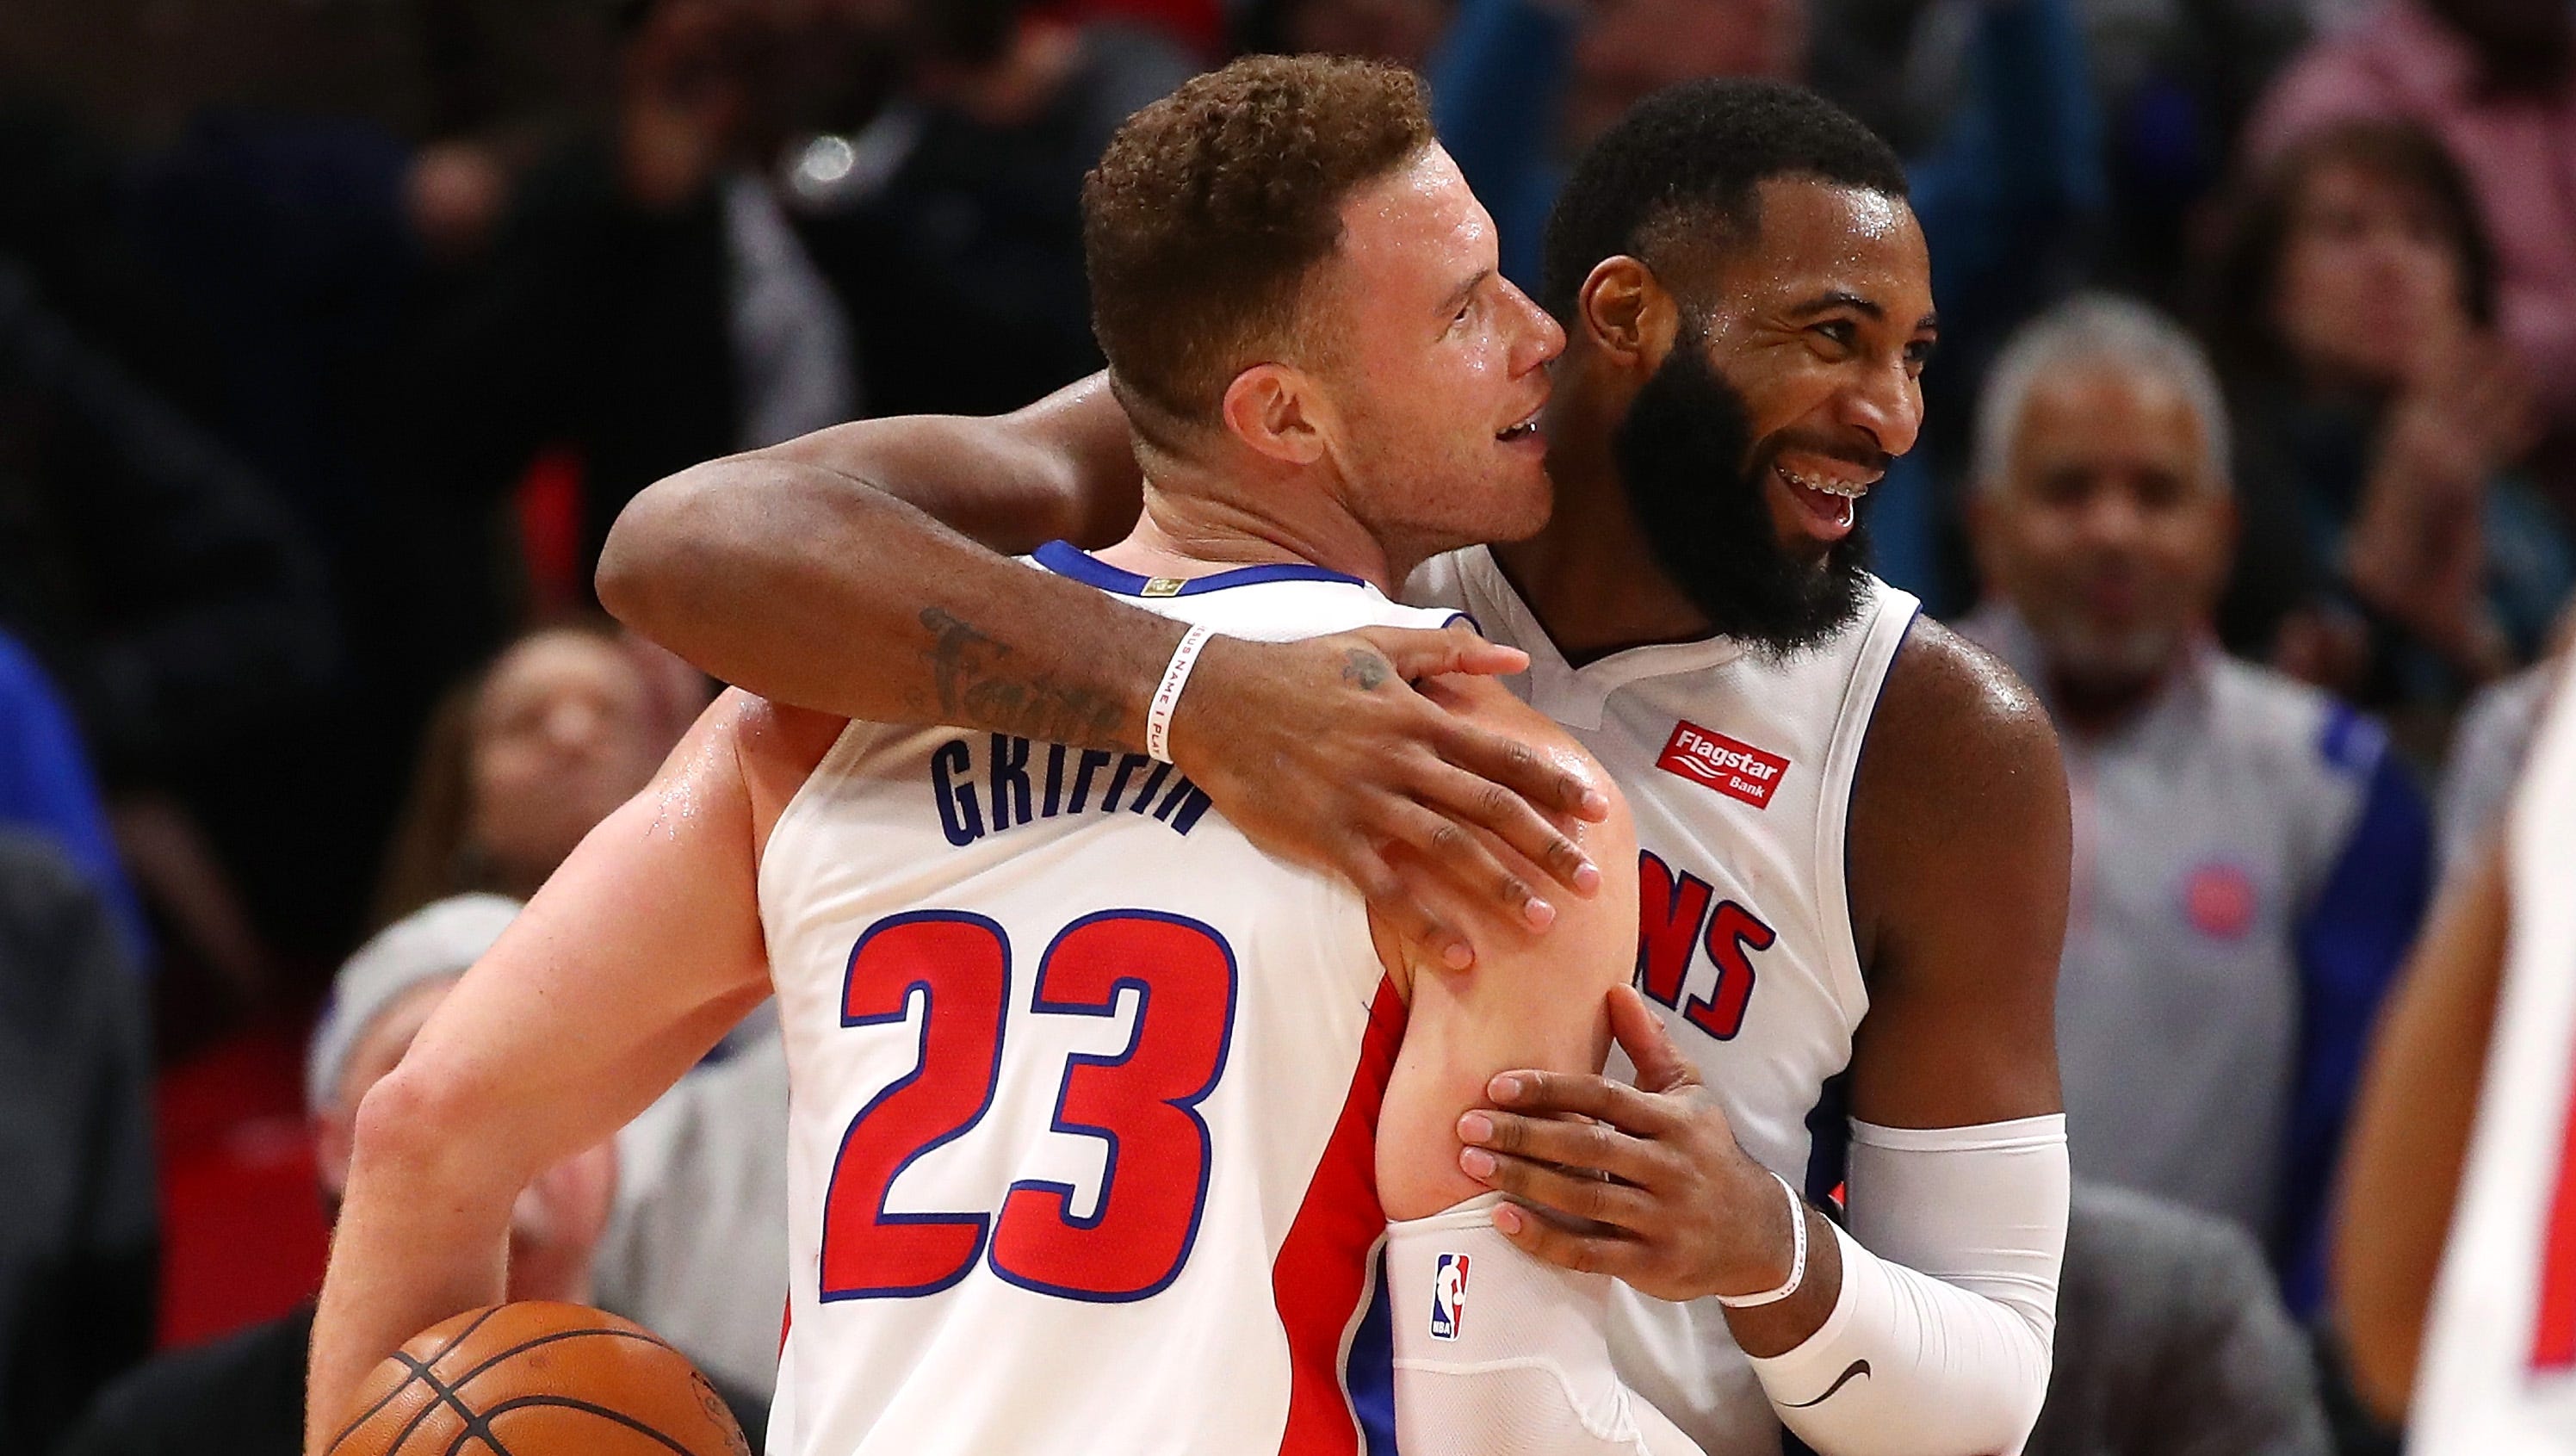 Blake Griffin and Andre Drummond